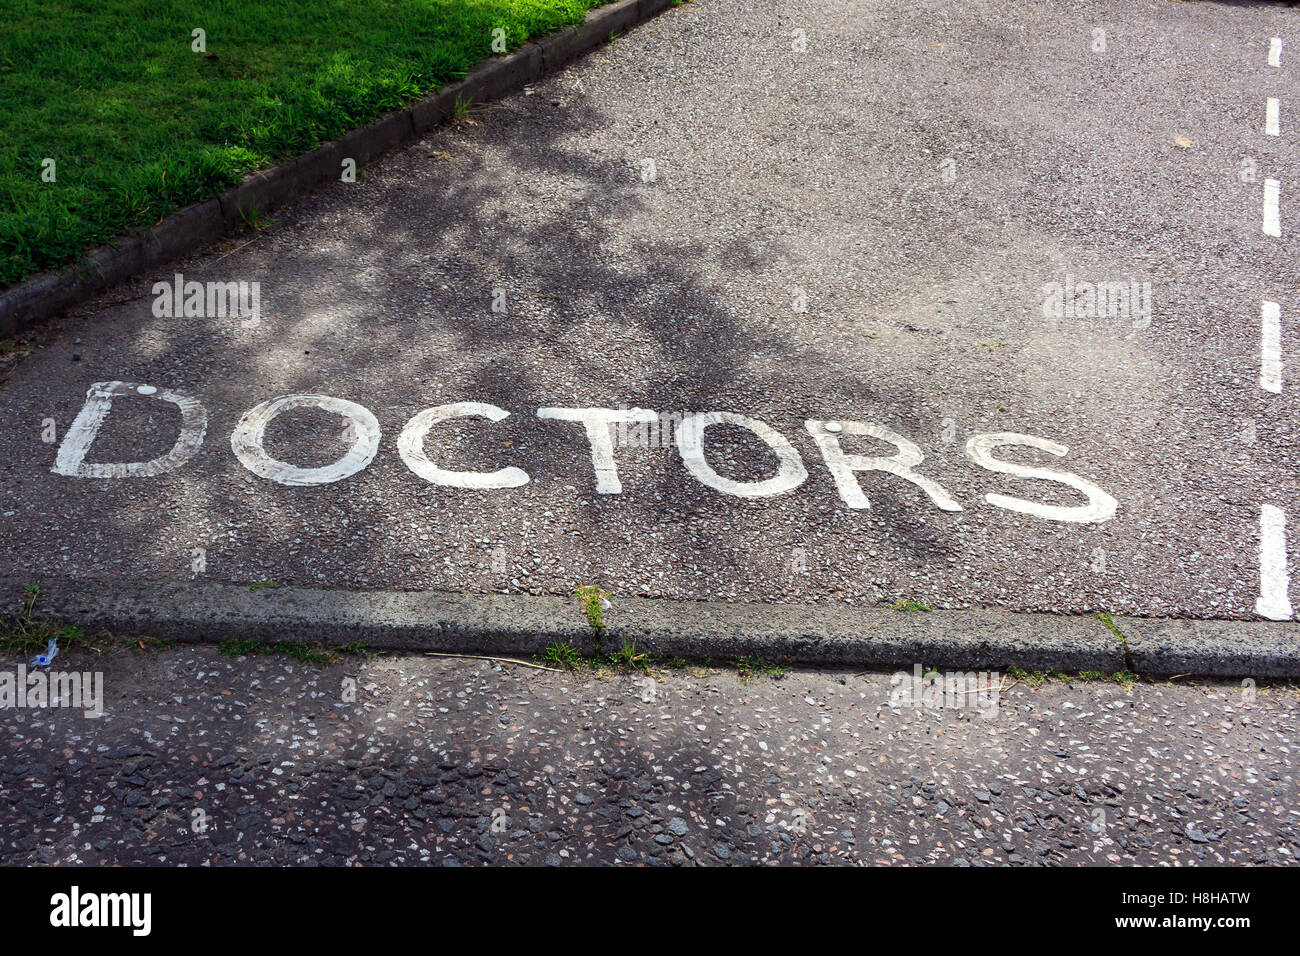 The words Doctors parking painted on the tarmac floor of the parking bay Stock Photo